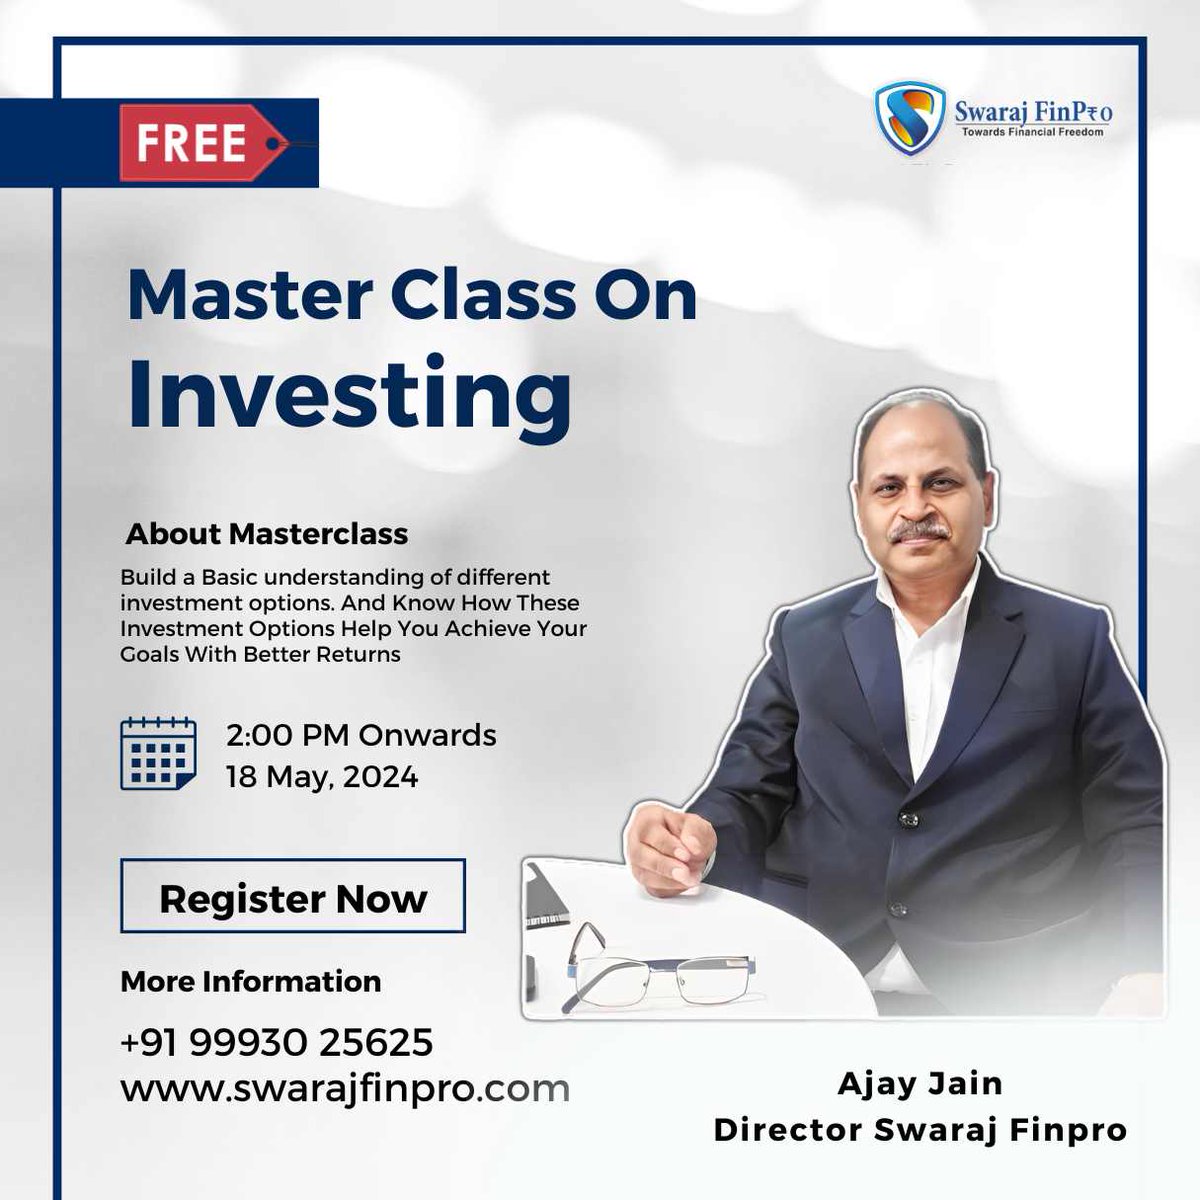 Free Master Class On Investing With Swaraj Finpro. Build a Basic understanding of different investment options. And Know How These Investment Options Help You Achieve Your Goals With Better Returns
#SIP #mutualfunds #equitymarkets 
🌐swarajfinpro.com
📞𝟗𝟗𝟗𝟑𝟎𝟐𝟓𝟔𝟐𝟓